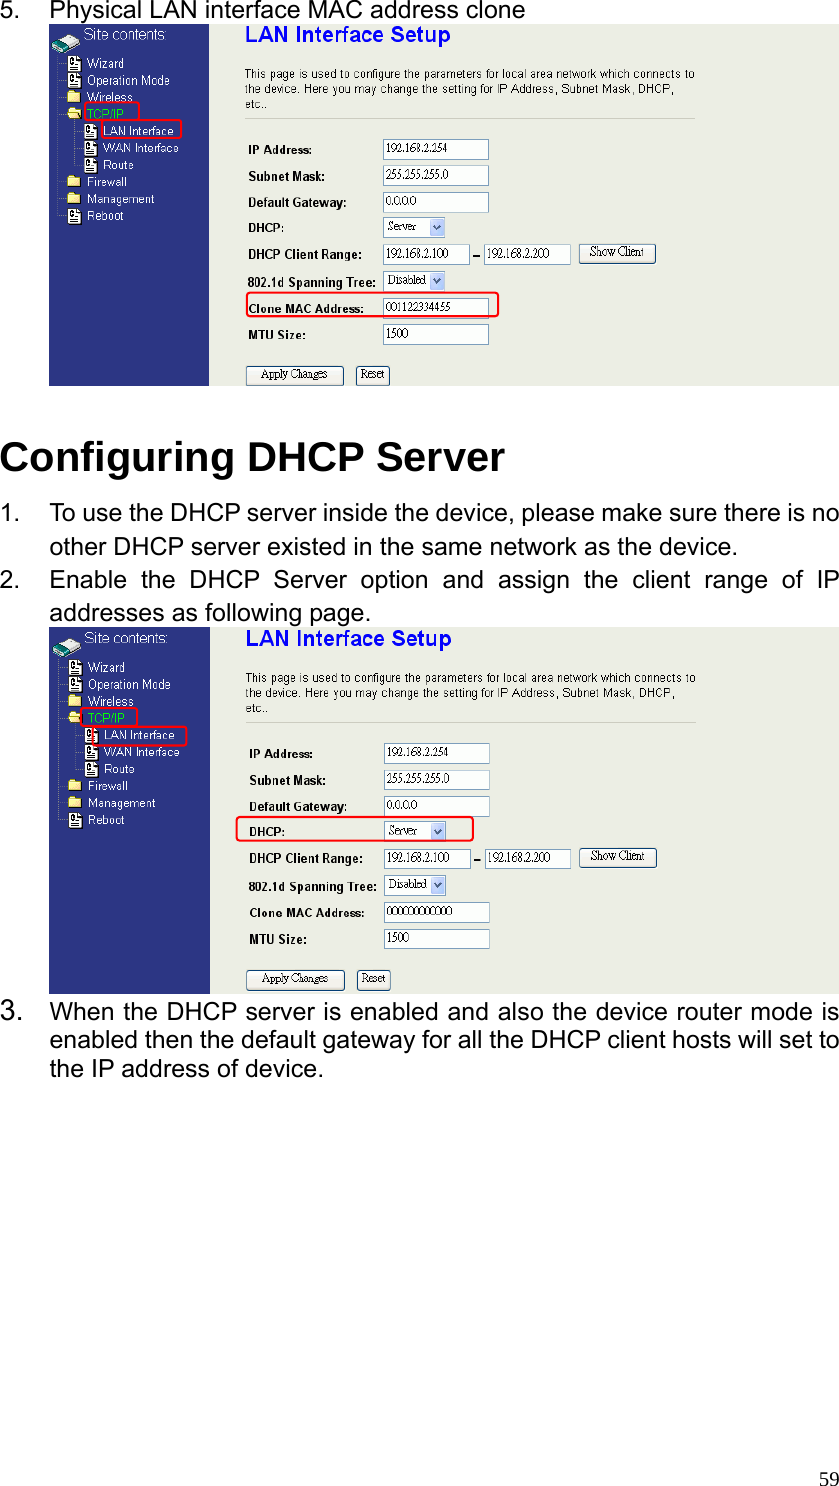  595.  Physical LAN interface MAC address clone     Configuring DHCP Server   1.  To use the DHCP server inside the device, please make sure there is no other DHCP server existed in the same network as the device. 2.  Enable the DHCP Server option and assign the client range of IP addresses as following page.  3.  When the DHCP server is enabled and also the device router mode is enabled then the default gateway for all the DHCP client hosts will set to the IP address of device.          